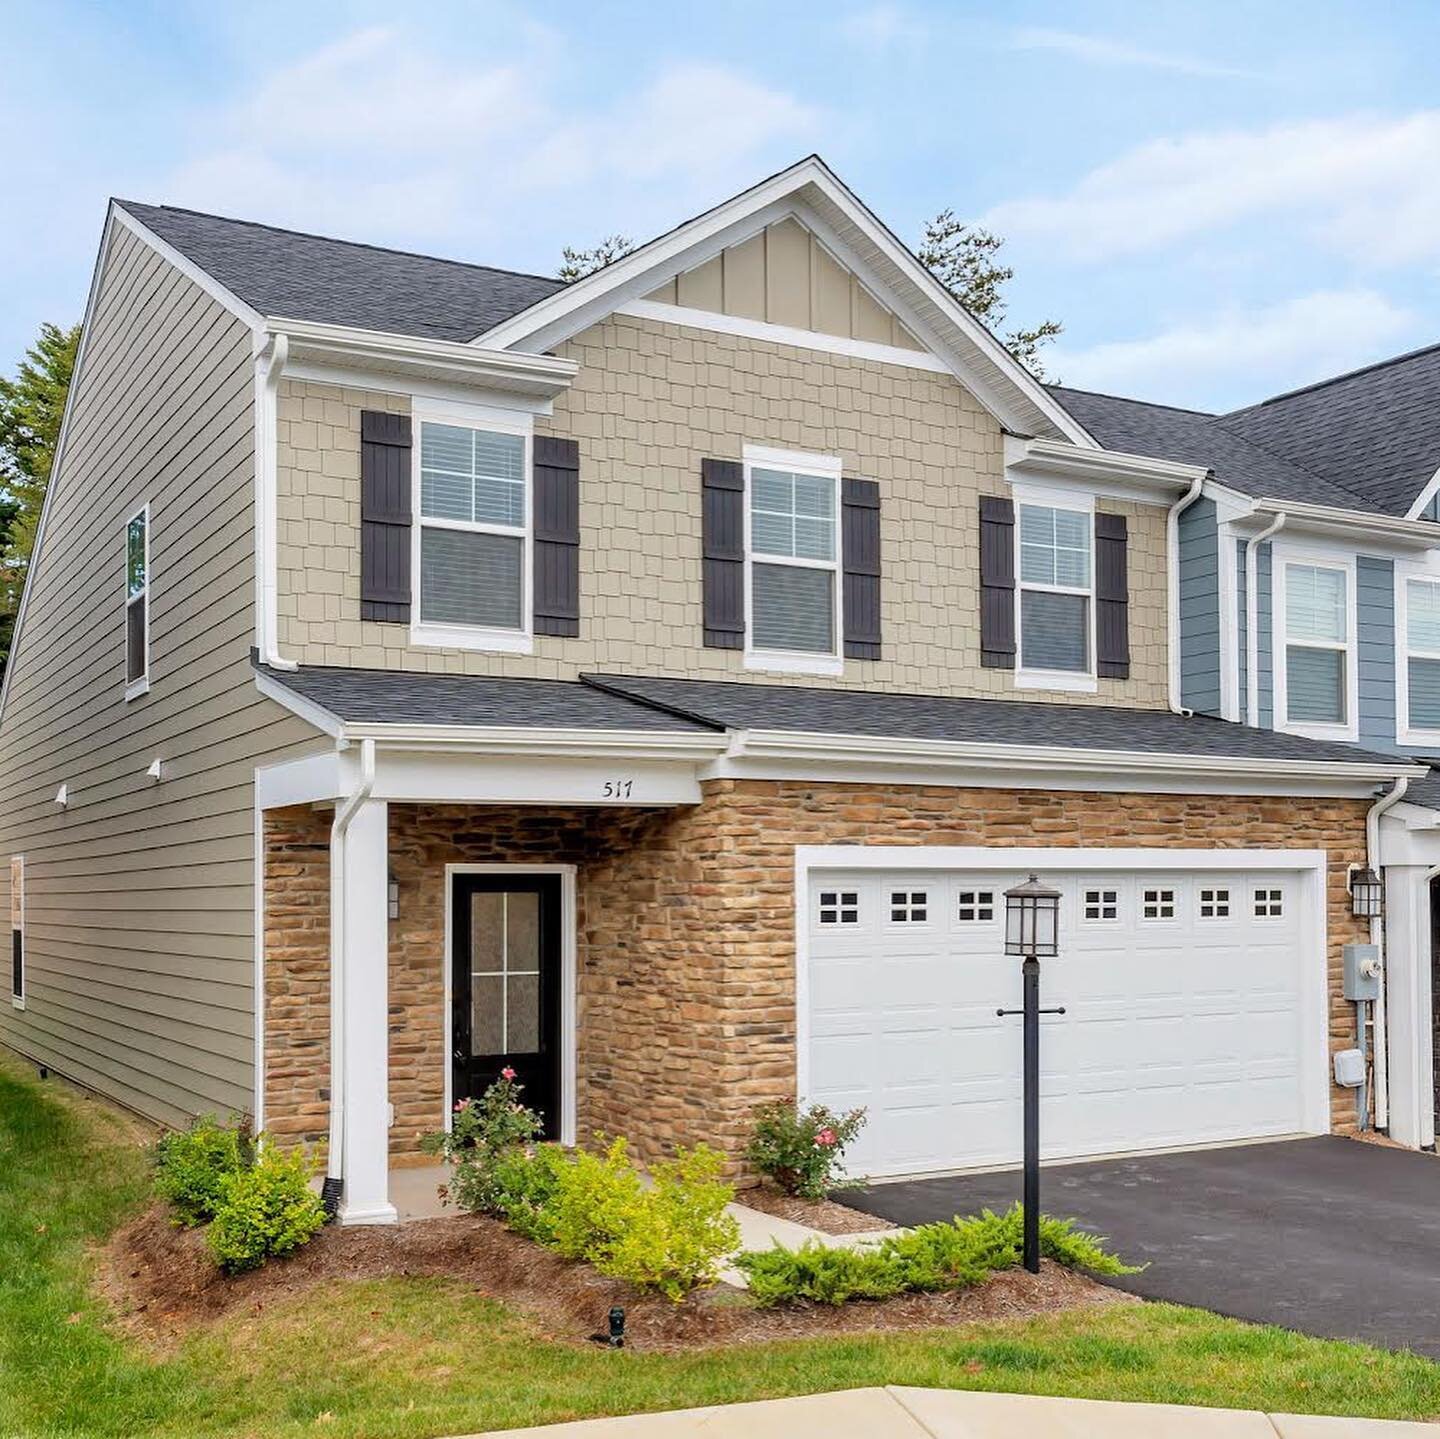 New to the rental market! Stunning like-new villa home in Crozet!

Discover this beautiful 3 bedroom, 2.5 bath end-unit villa home located in the desirable Glenbrook at Parkside community, adjacent to Crozet Park. Easy access to various shops and res